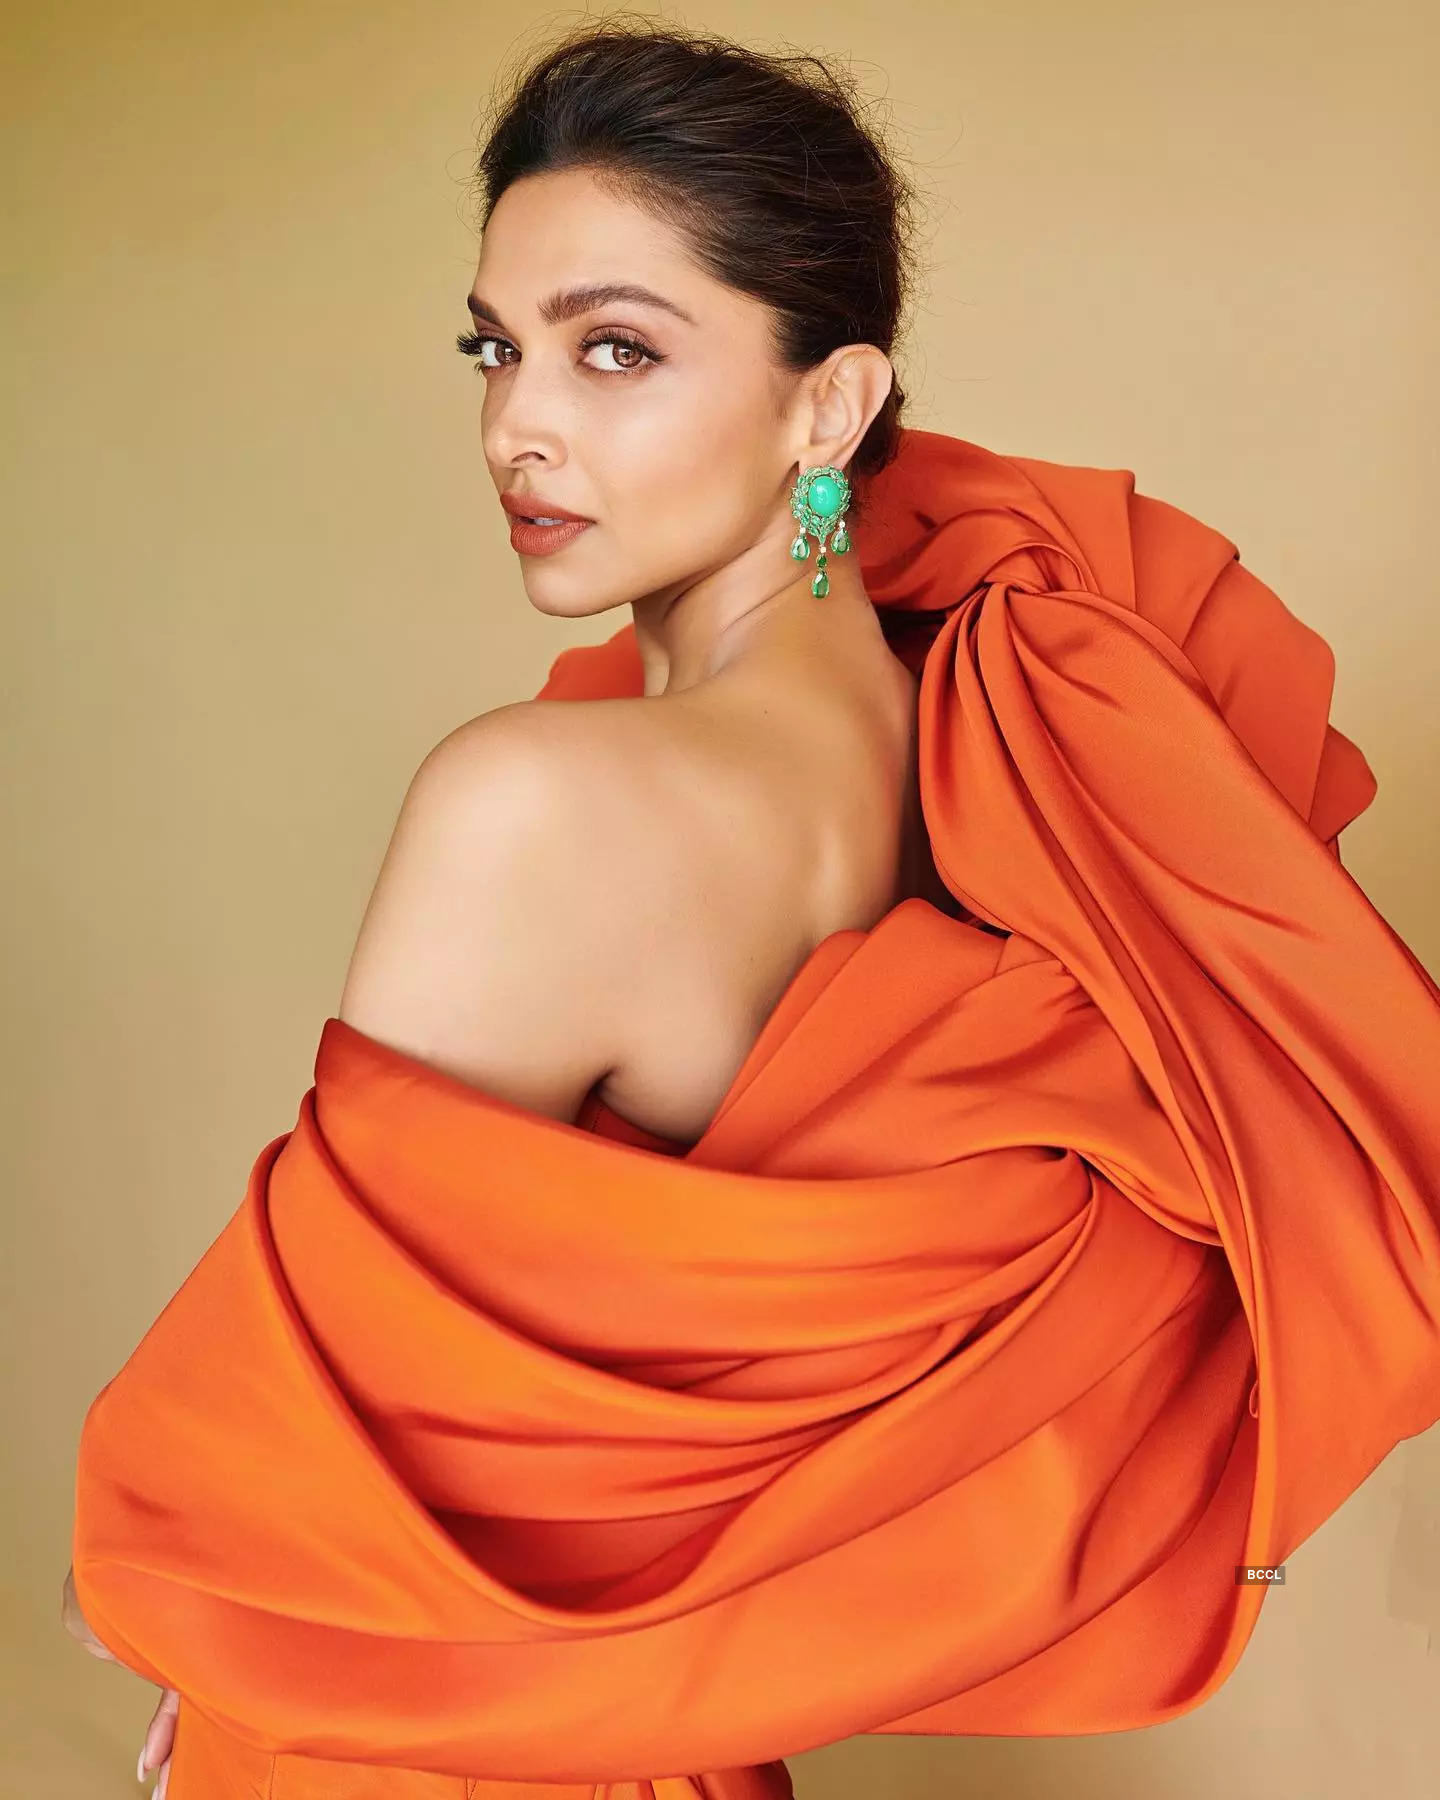 These glamorous pictures of Deepika Padukone are breaking the internet